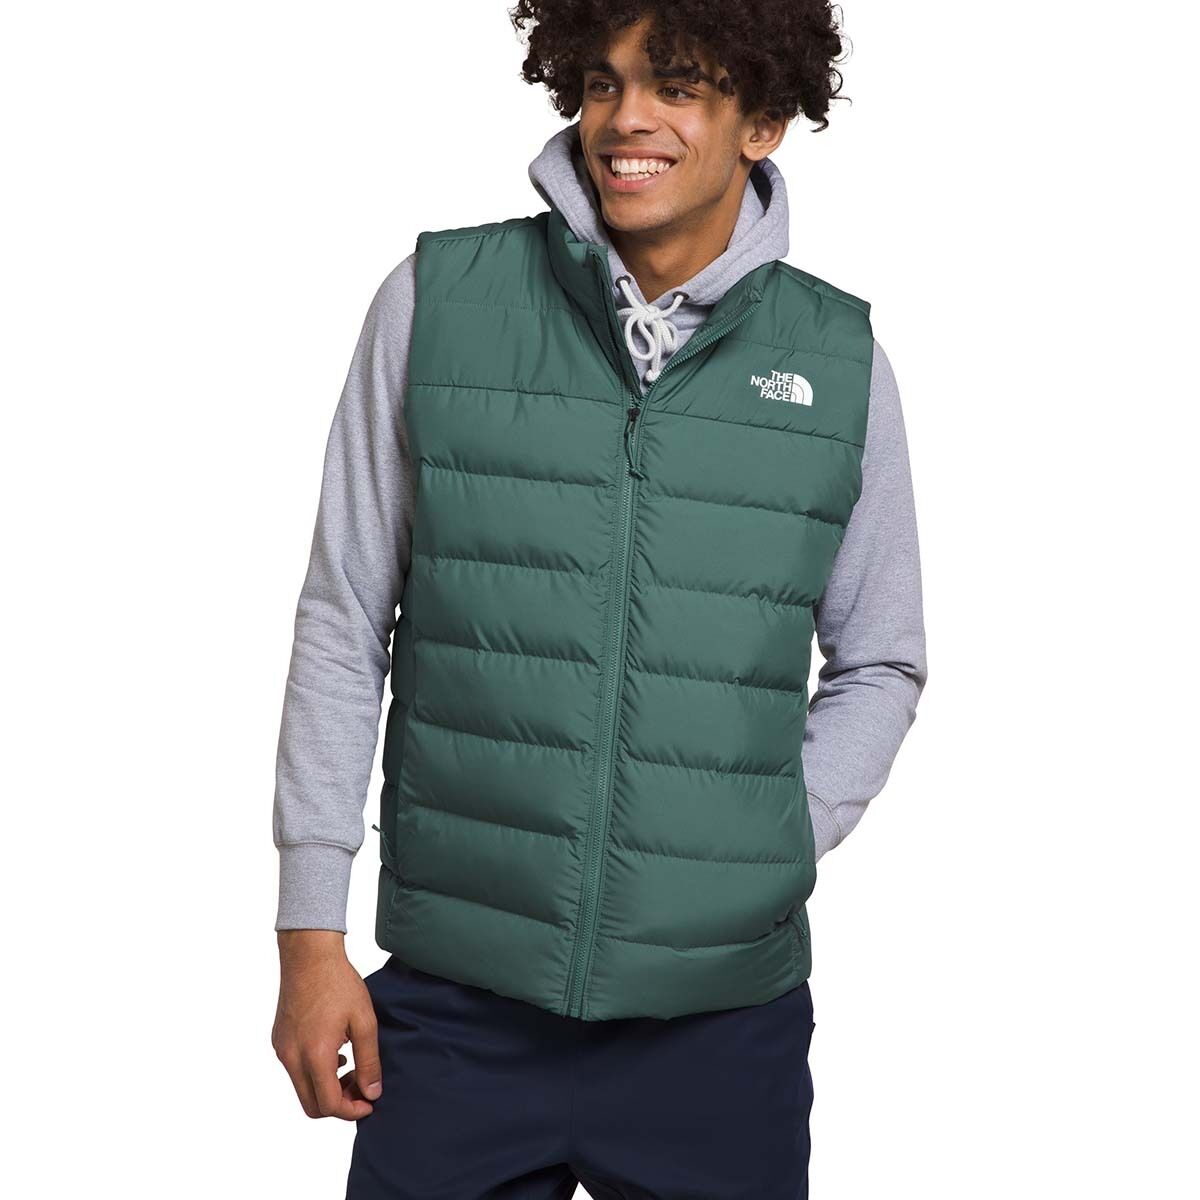 The North Face Men's Vests   Backcountry.com